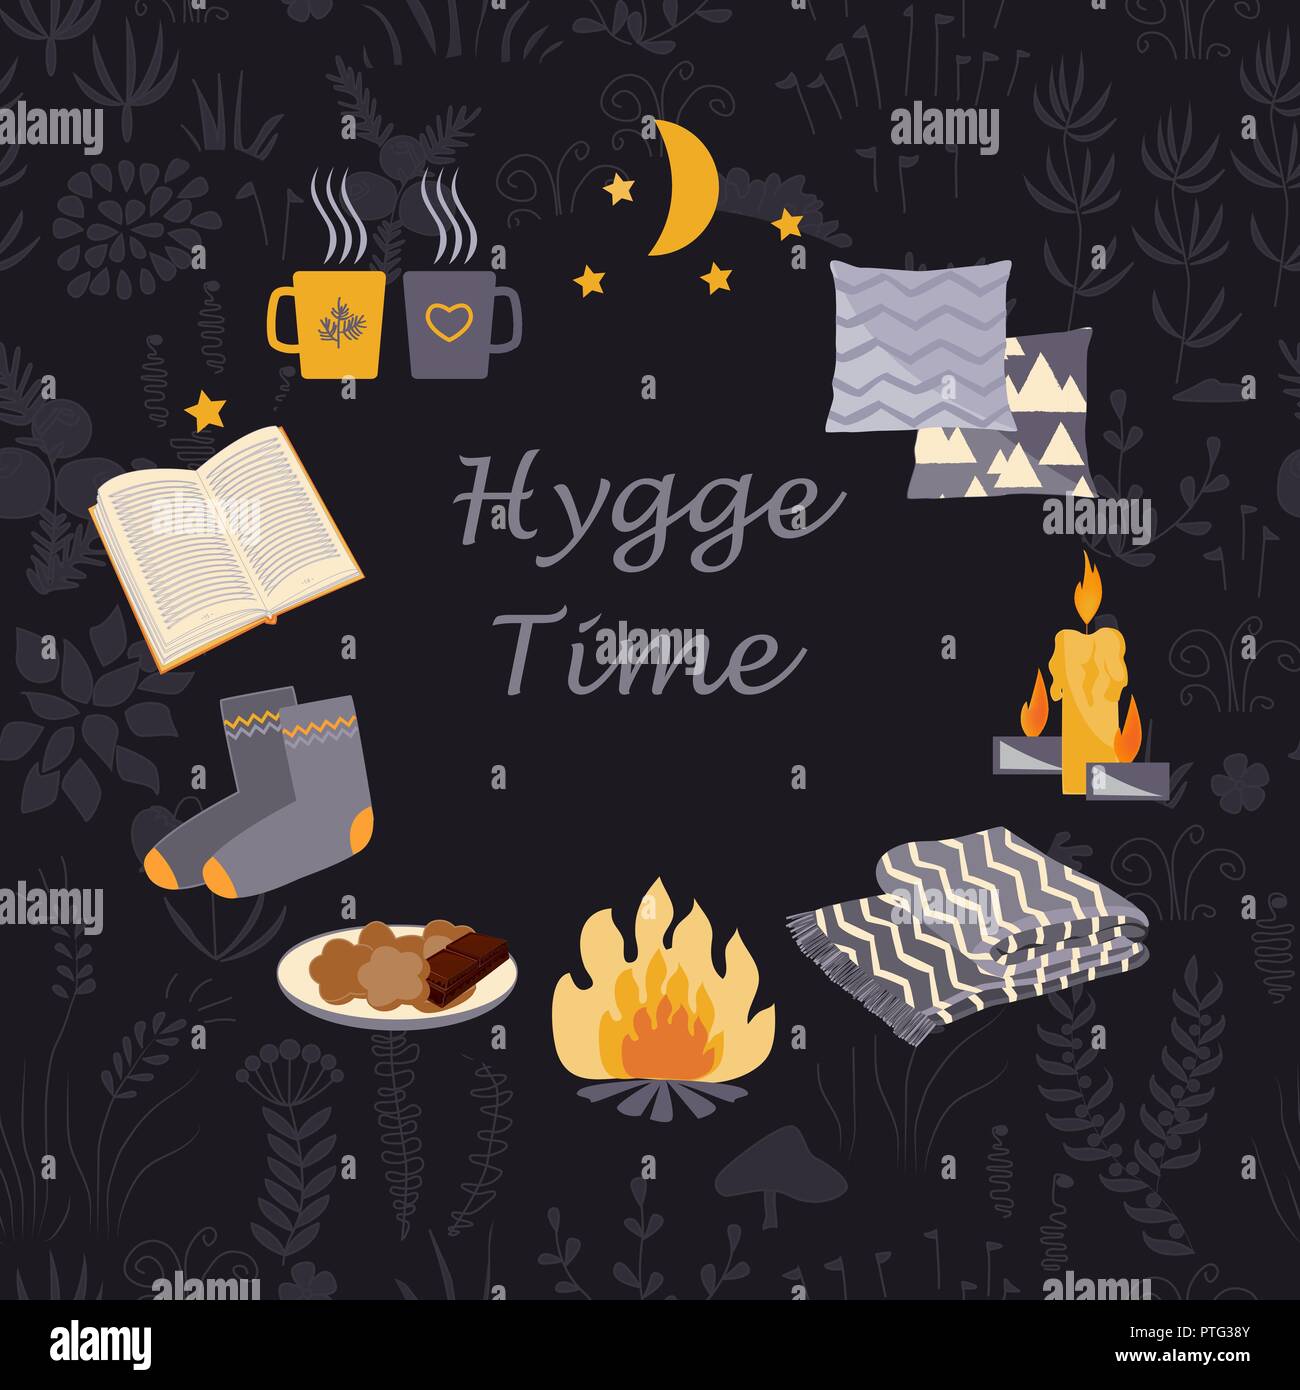 Circle frame for Hygge and Camping concepts. Pattern with cozy forest and camping symbols: blanket, warm socks, campfire, hot drink, moon, and grass.  Stock Vector